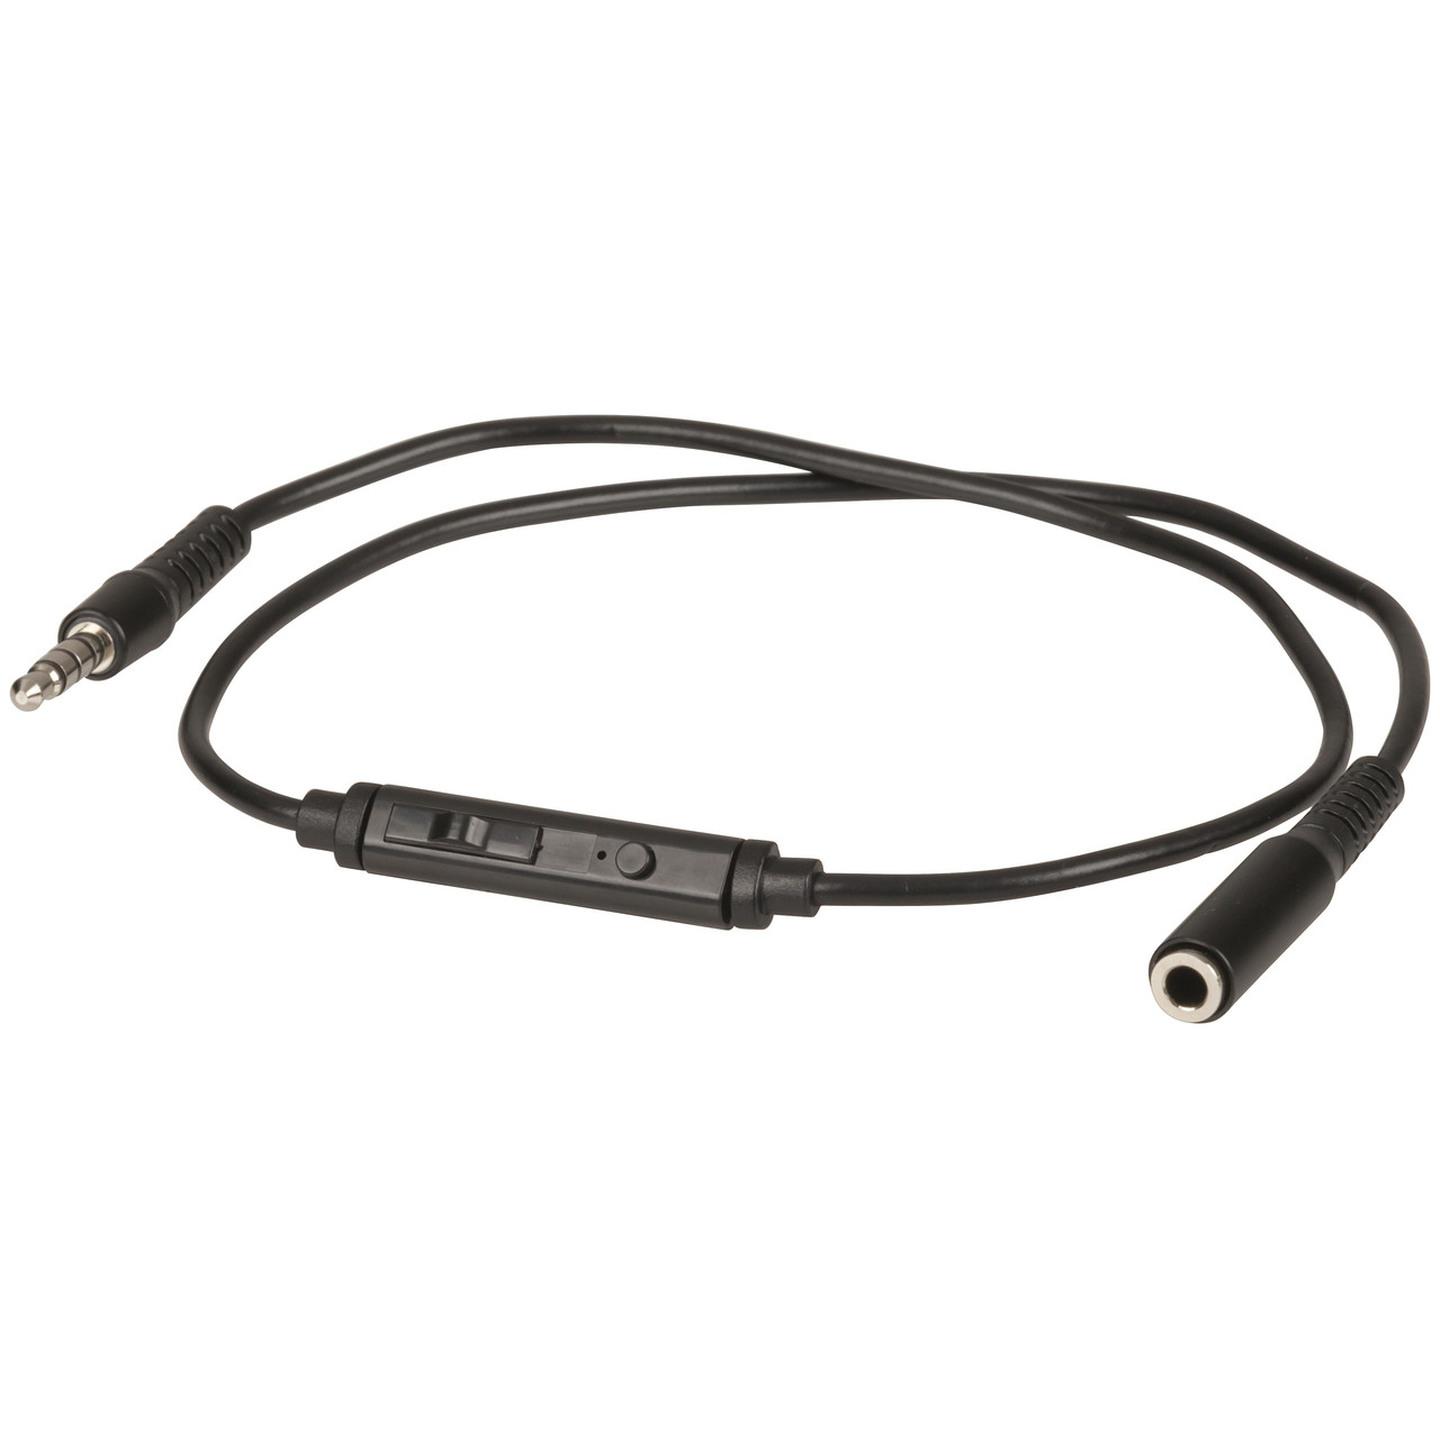 3.5mm Plug to Socket Cable with Microphone and Volume Control - 0.5m